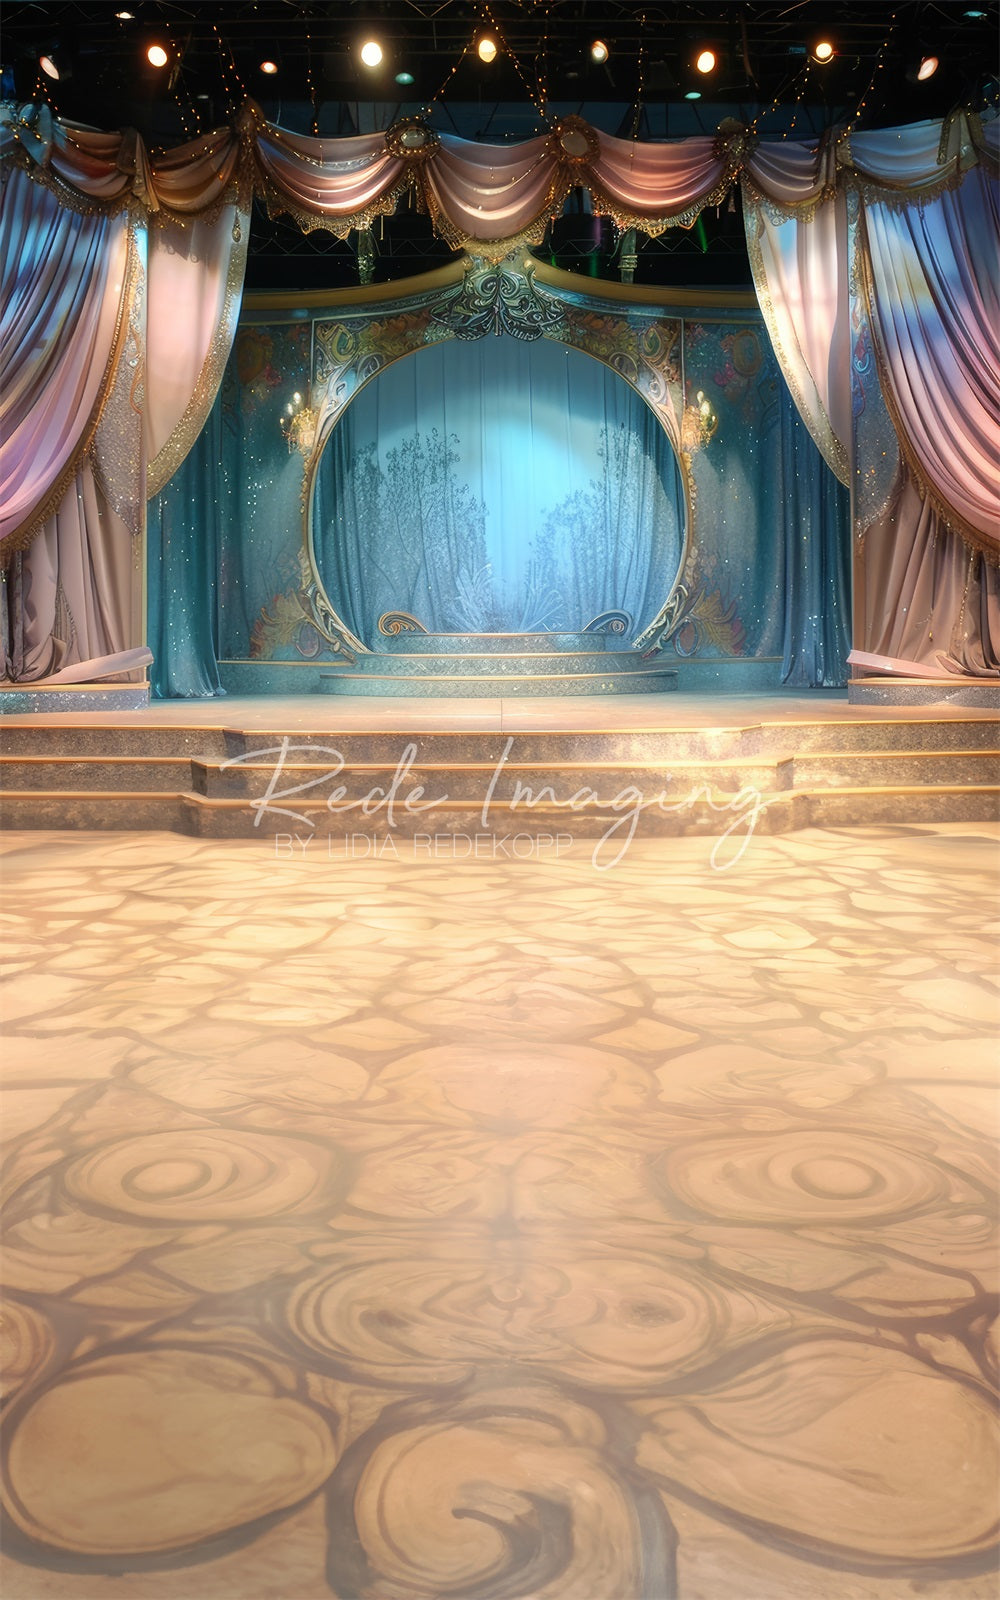 Kate Vintage Colorful Curtain Arched Dancer Stage Backdrop Designed by Lidia Redekopp